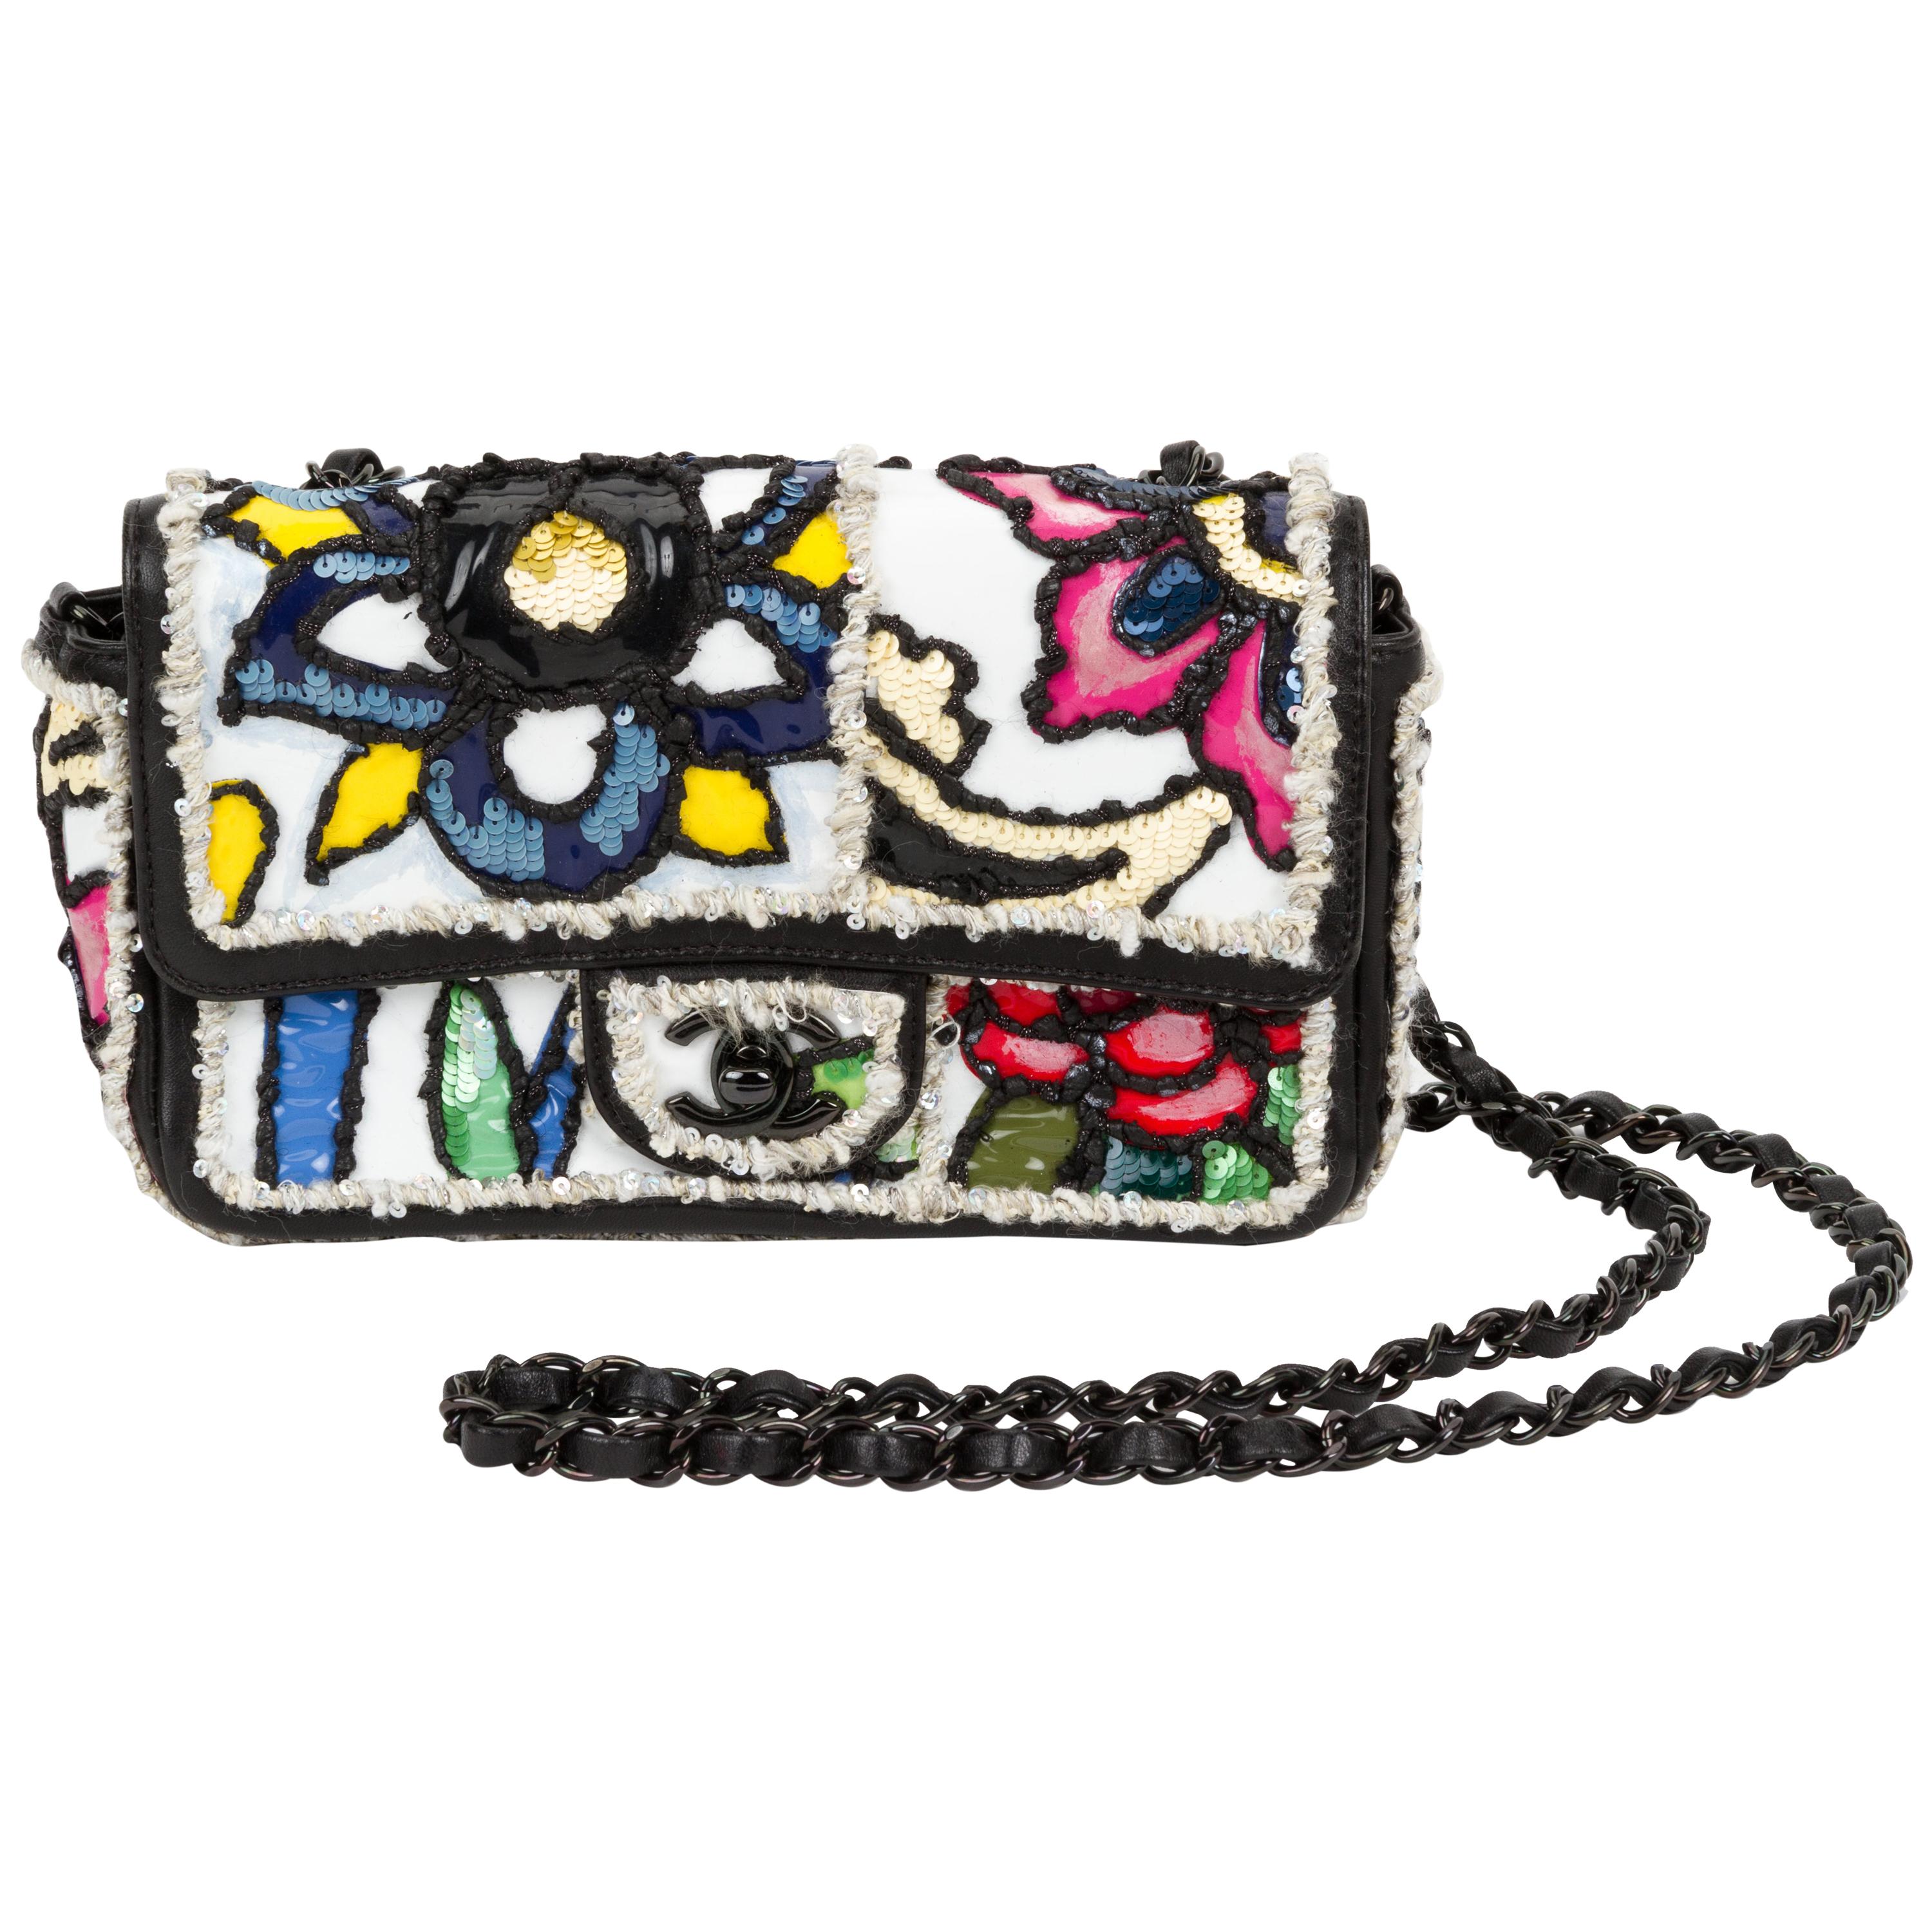 New $22, 000 Limited Edition Chanel Hand Beaded Jewel Bag